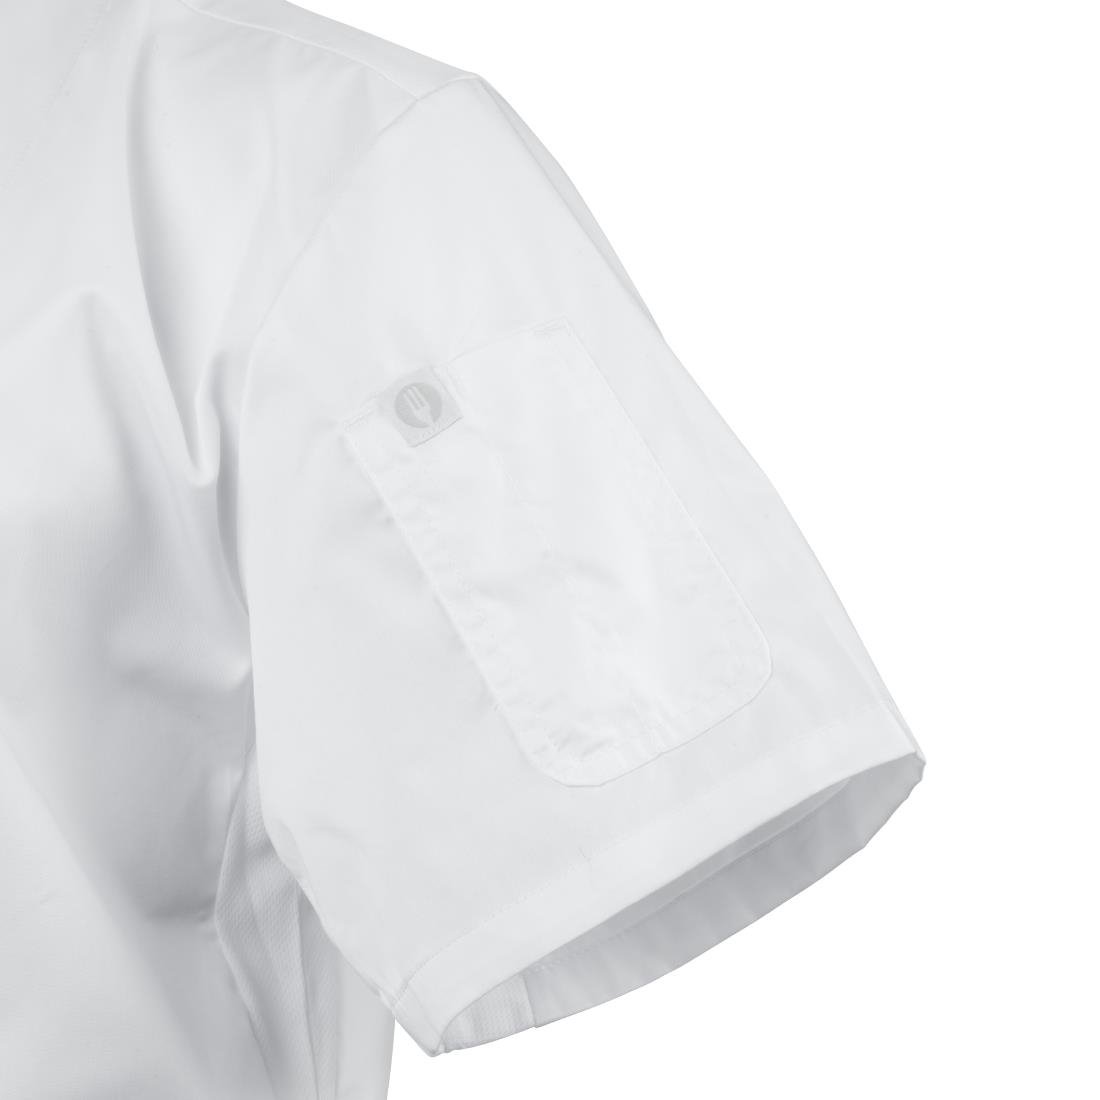 BB669-XXL Chef Works Cannes Short Sleeve Chefs Jacket Size XXL JD Catering Equipment Solutions Ltd